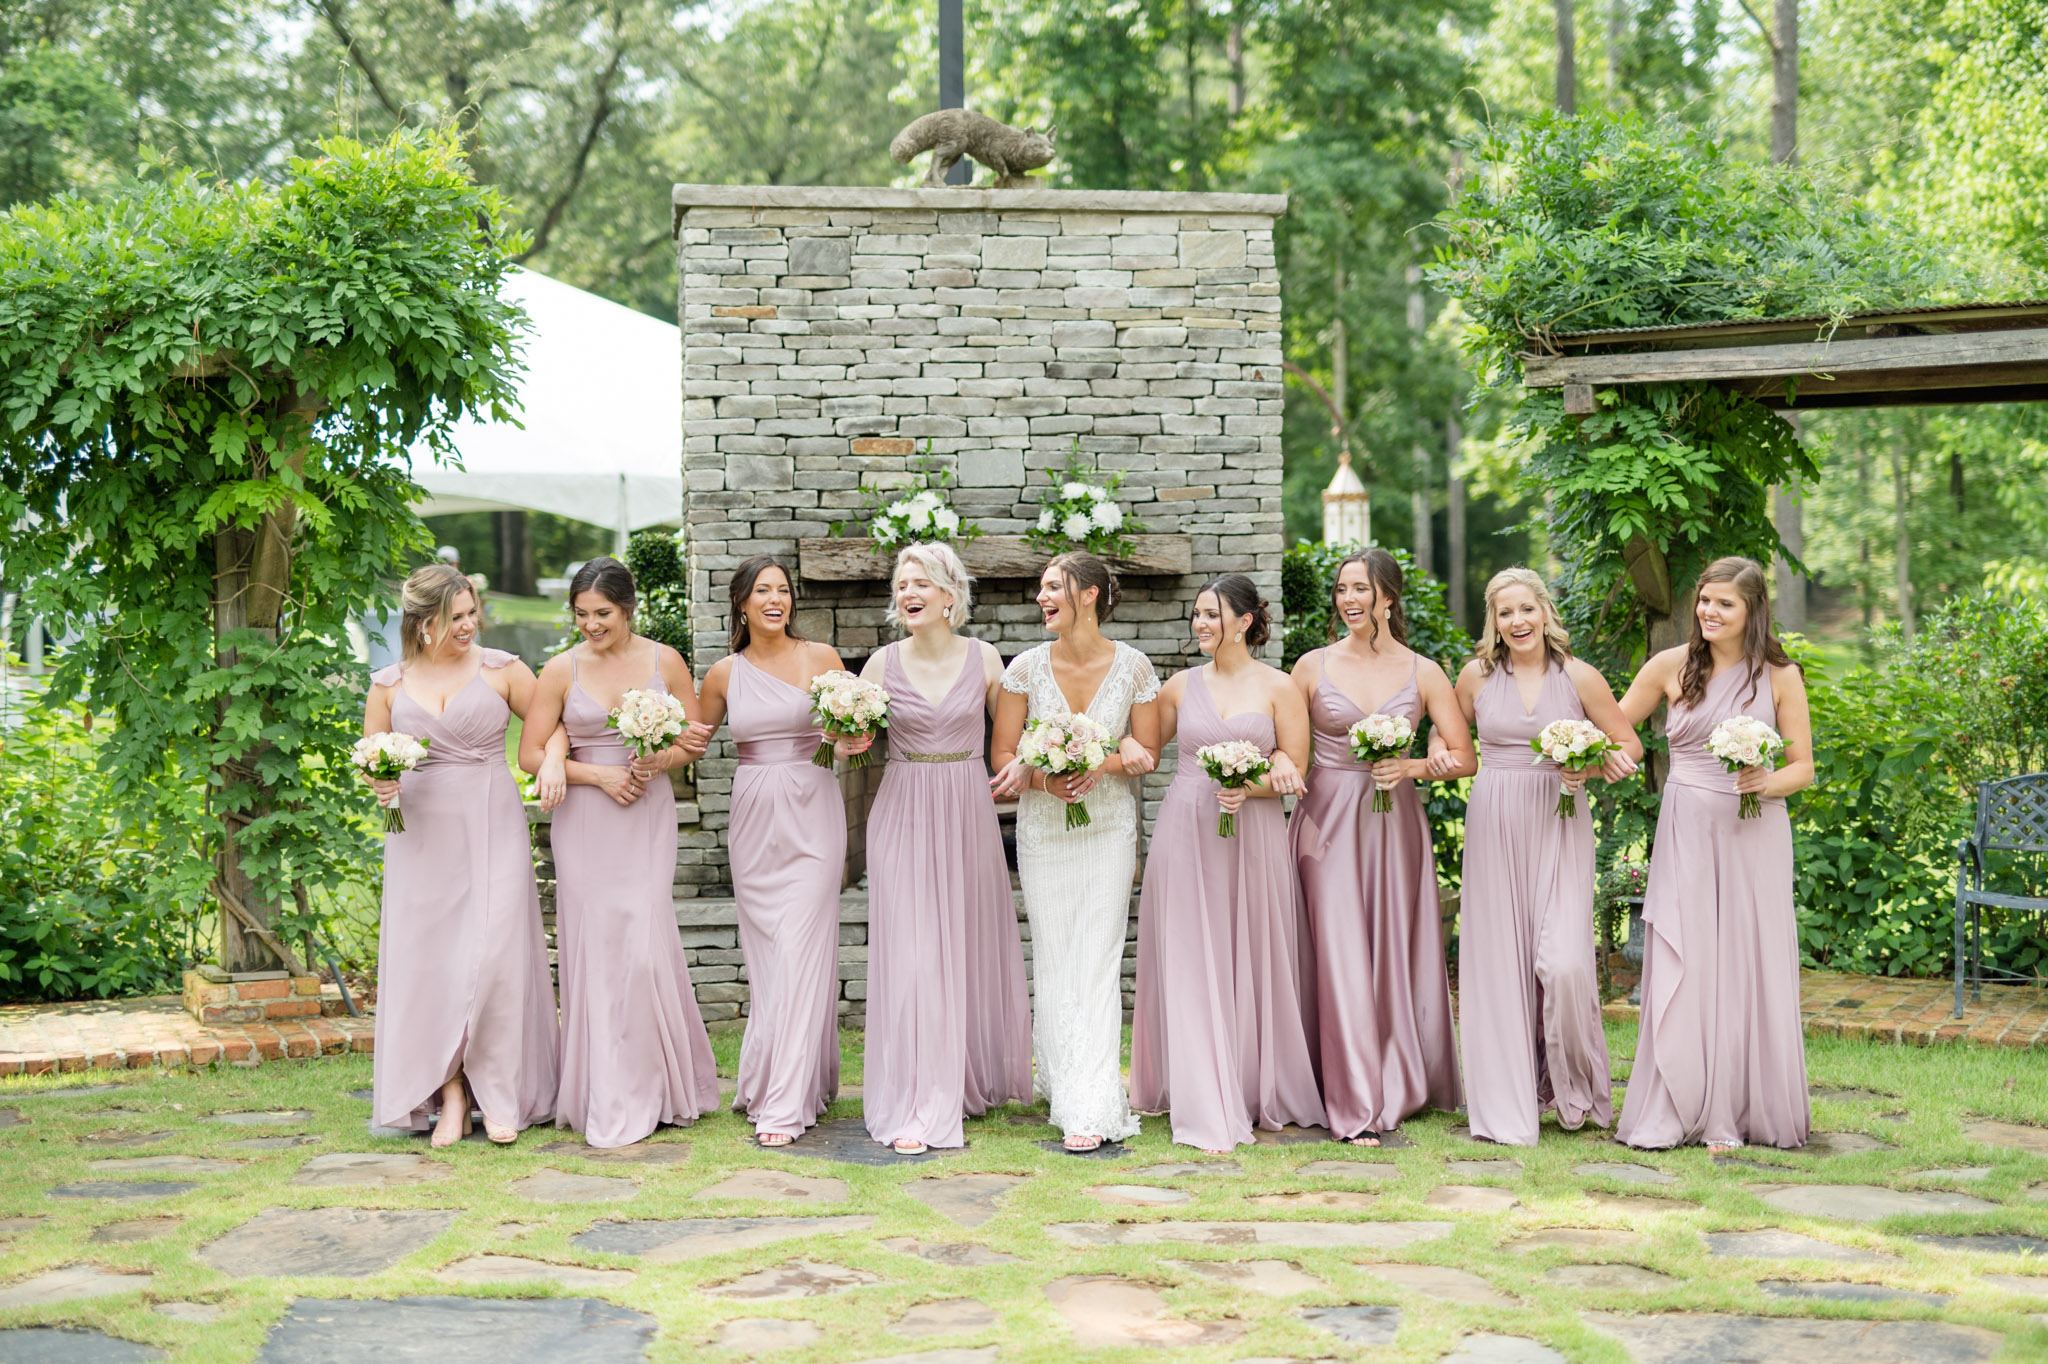 Bride walks with bridesmaids and laugh.